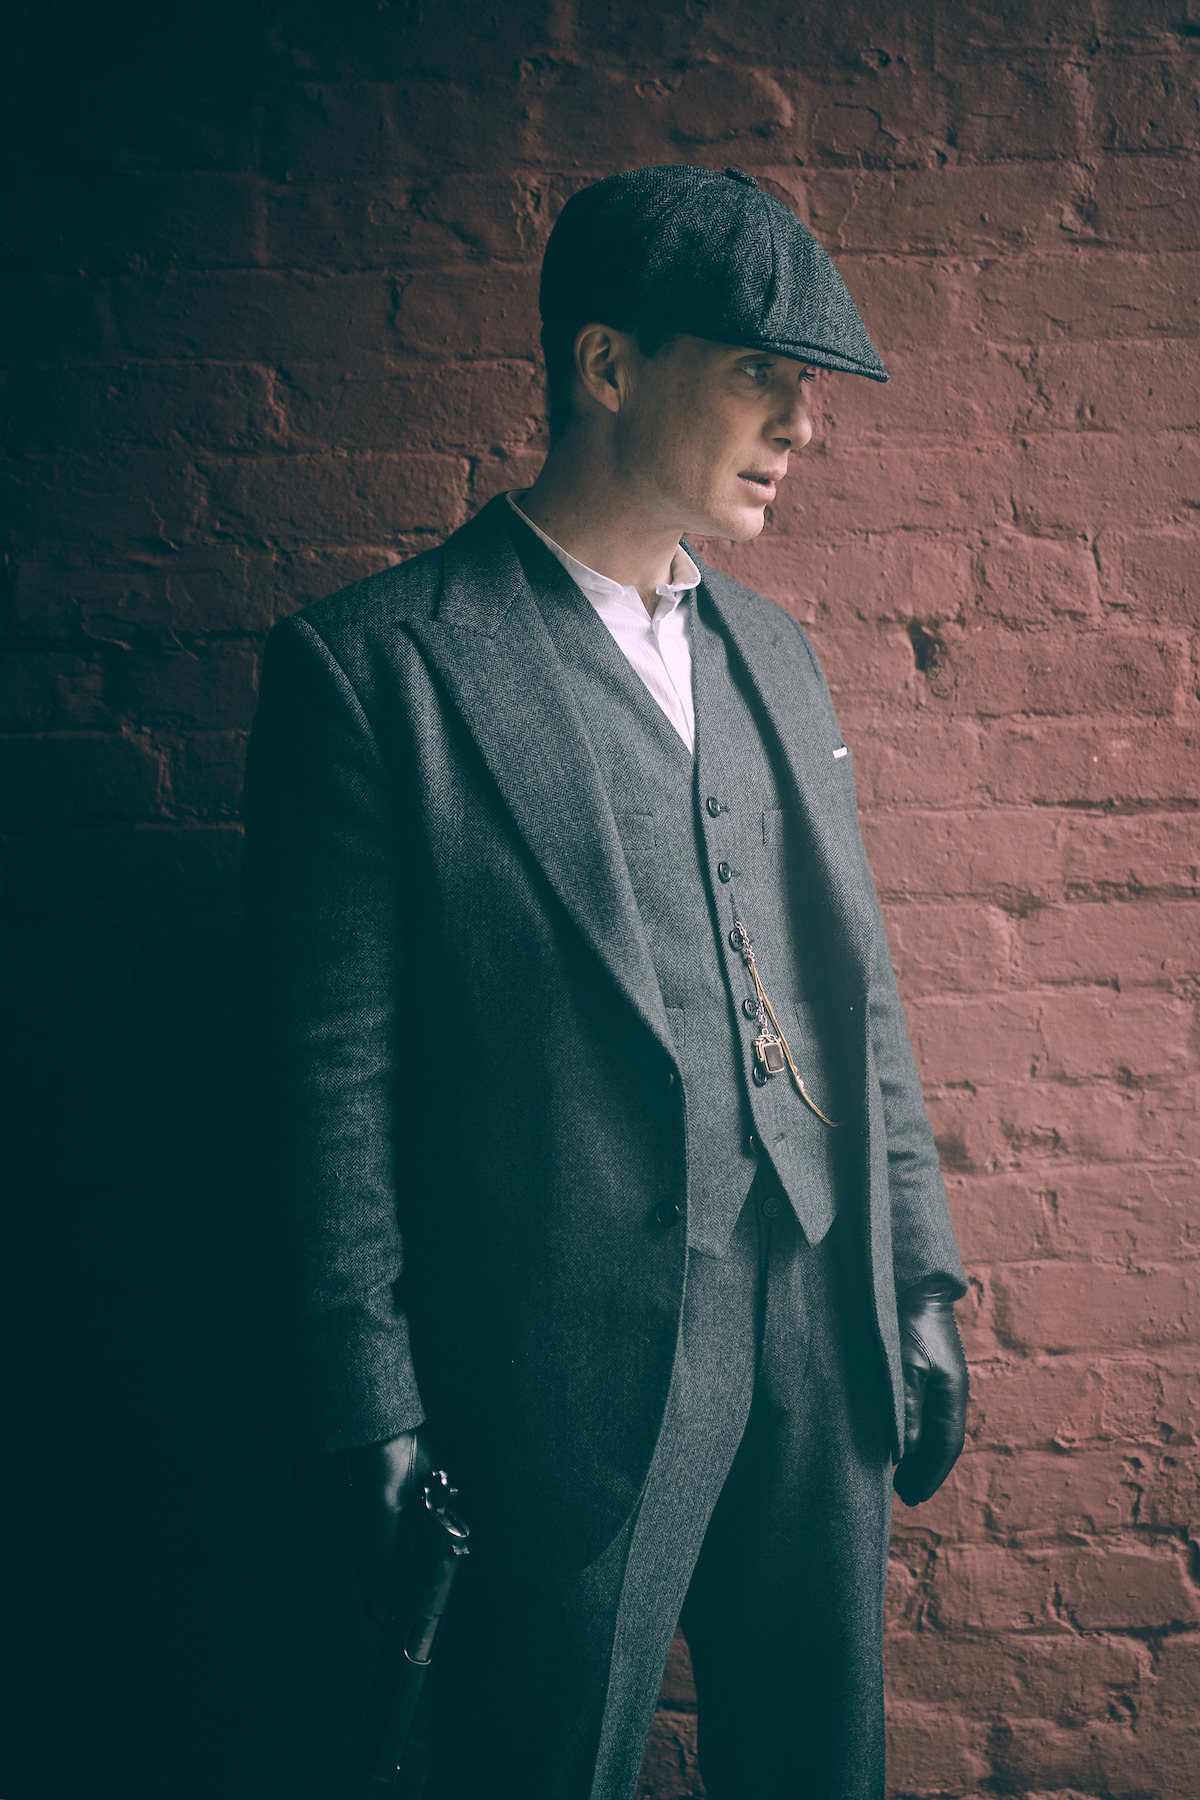 Find your perfect Peaky Blinders-inspired suit